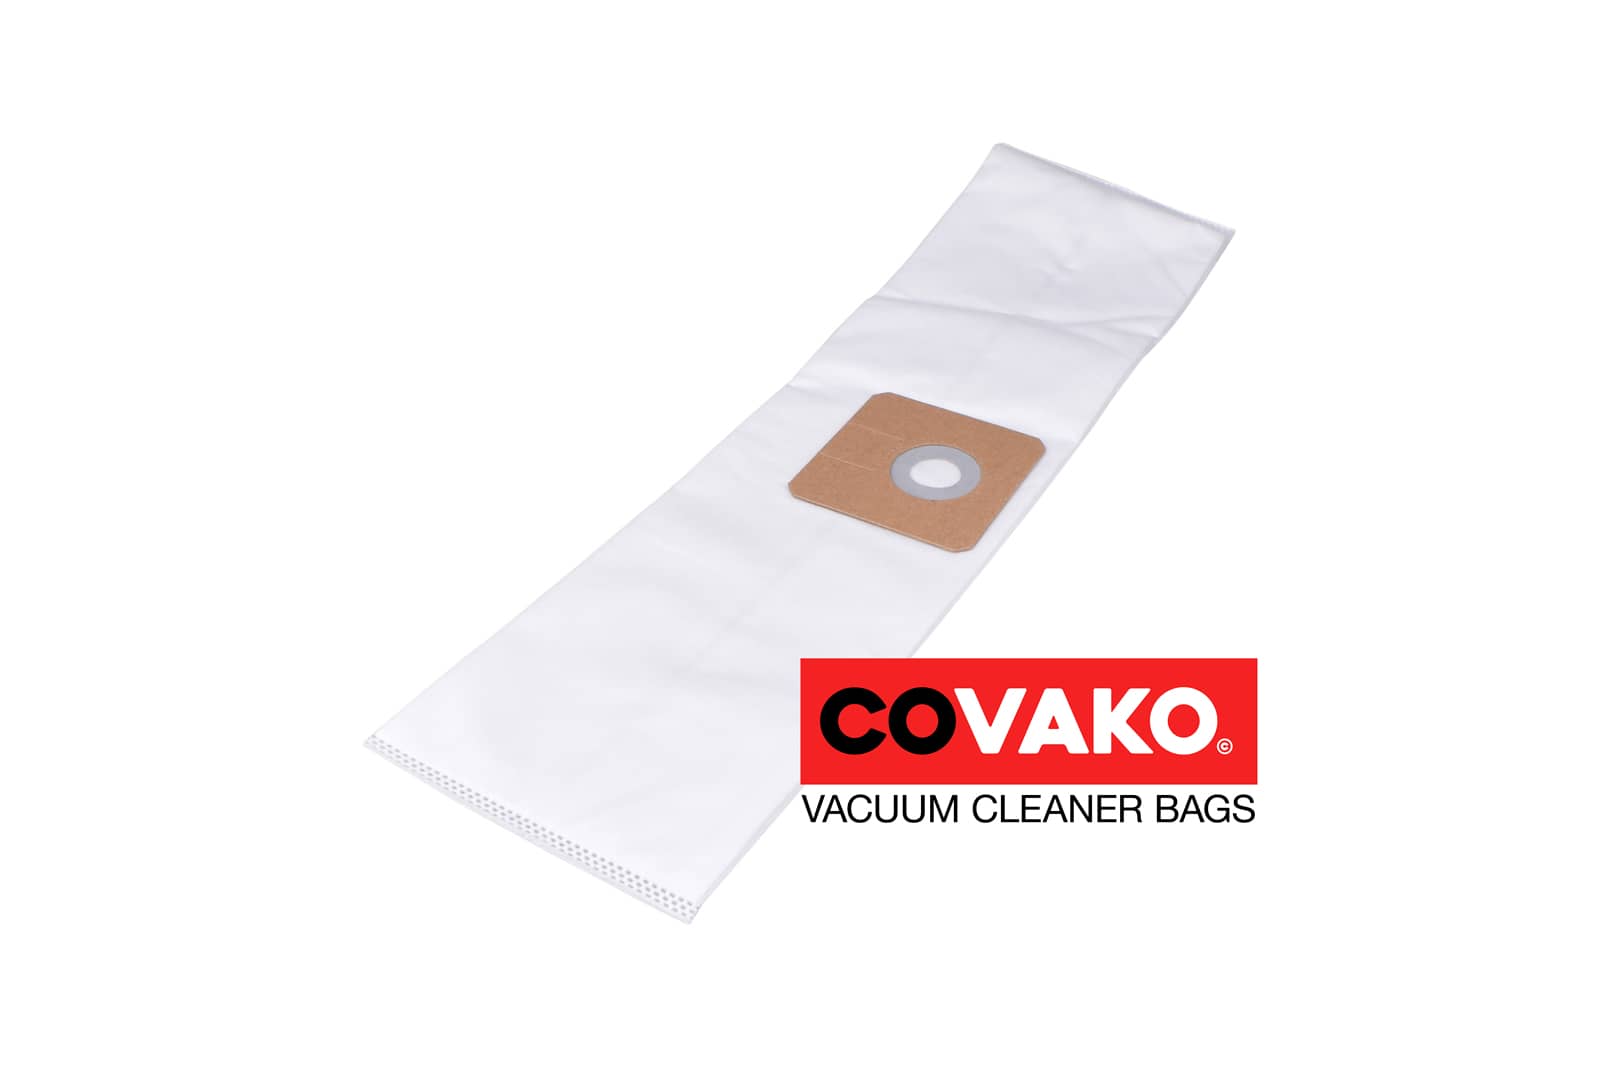 TMB Piccolo Fly / Synthesis - TMB vacuum cleaner bags